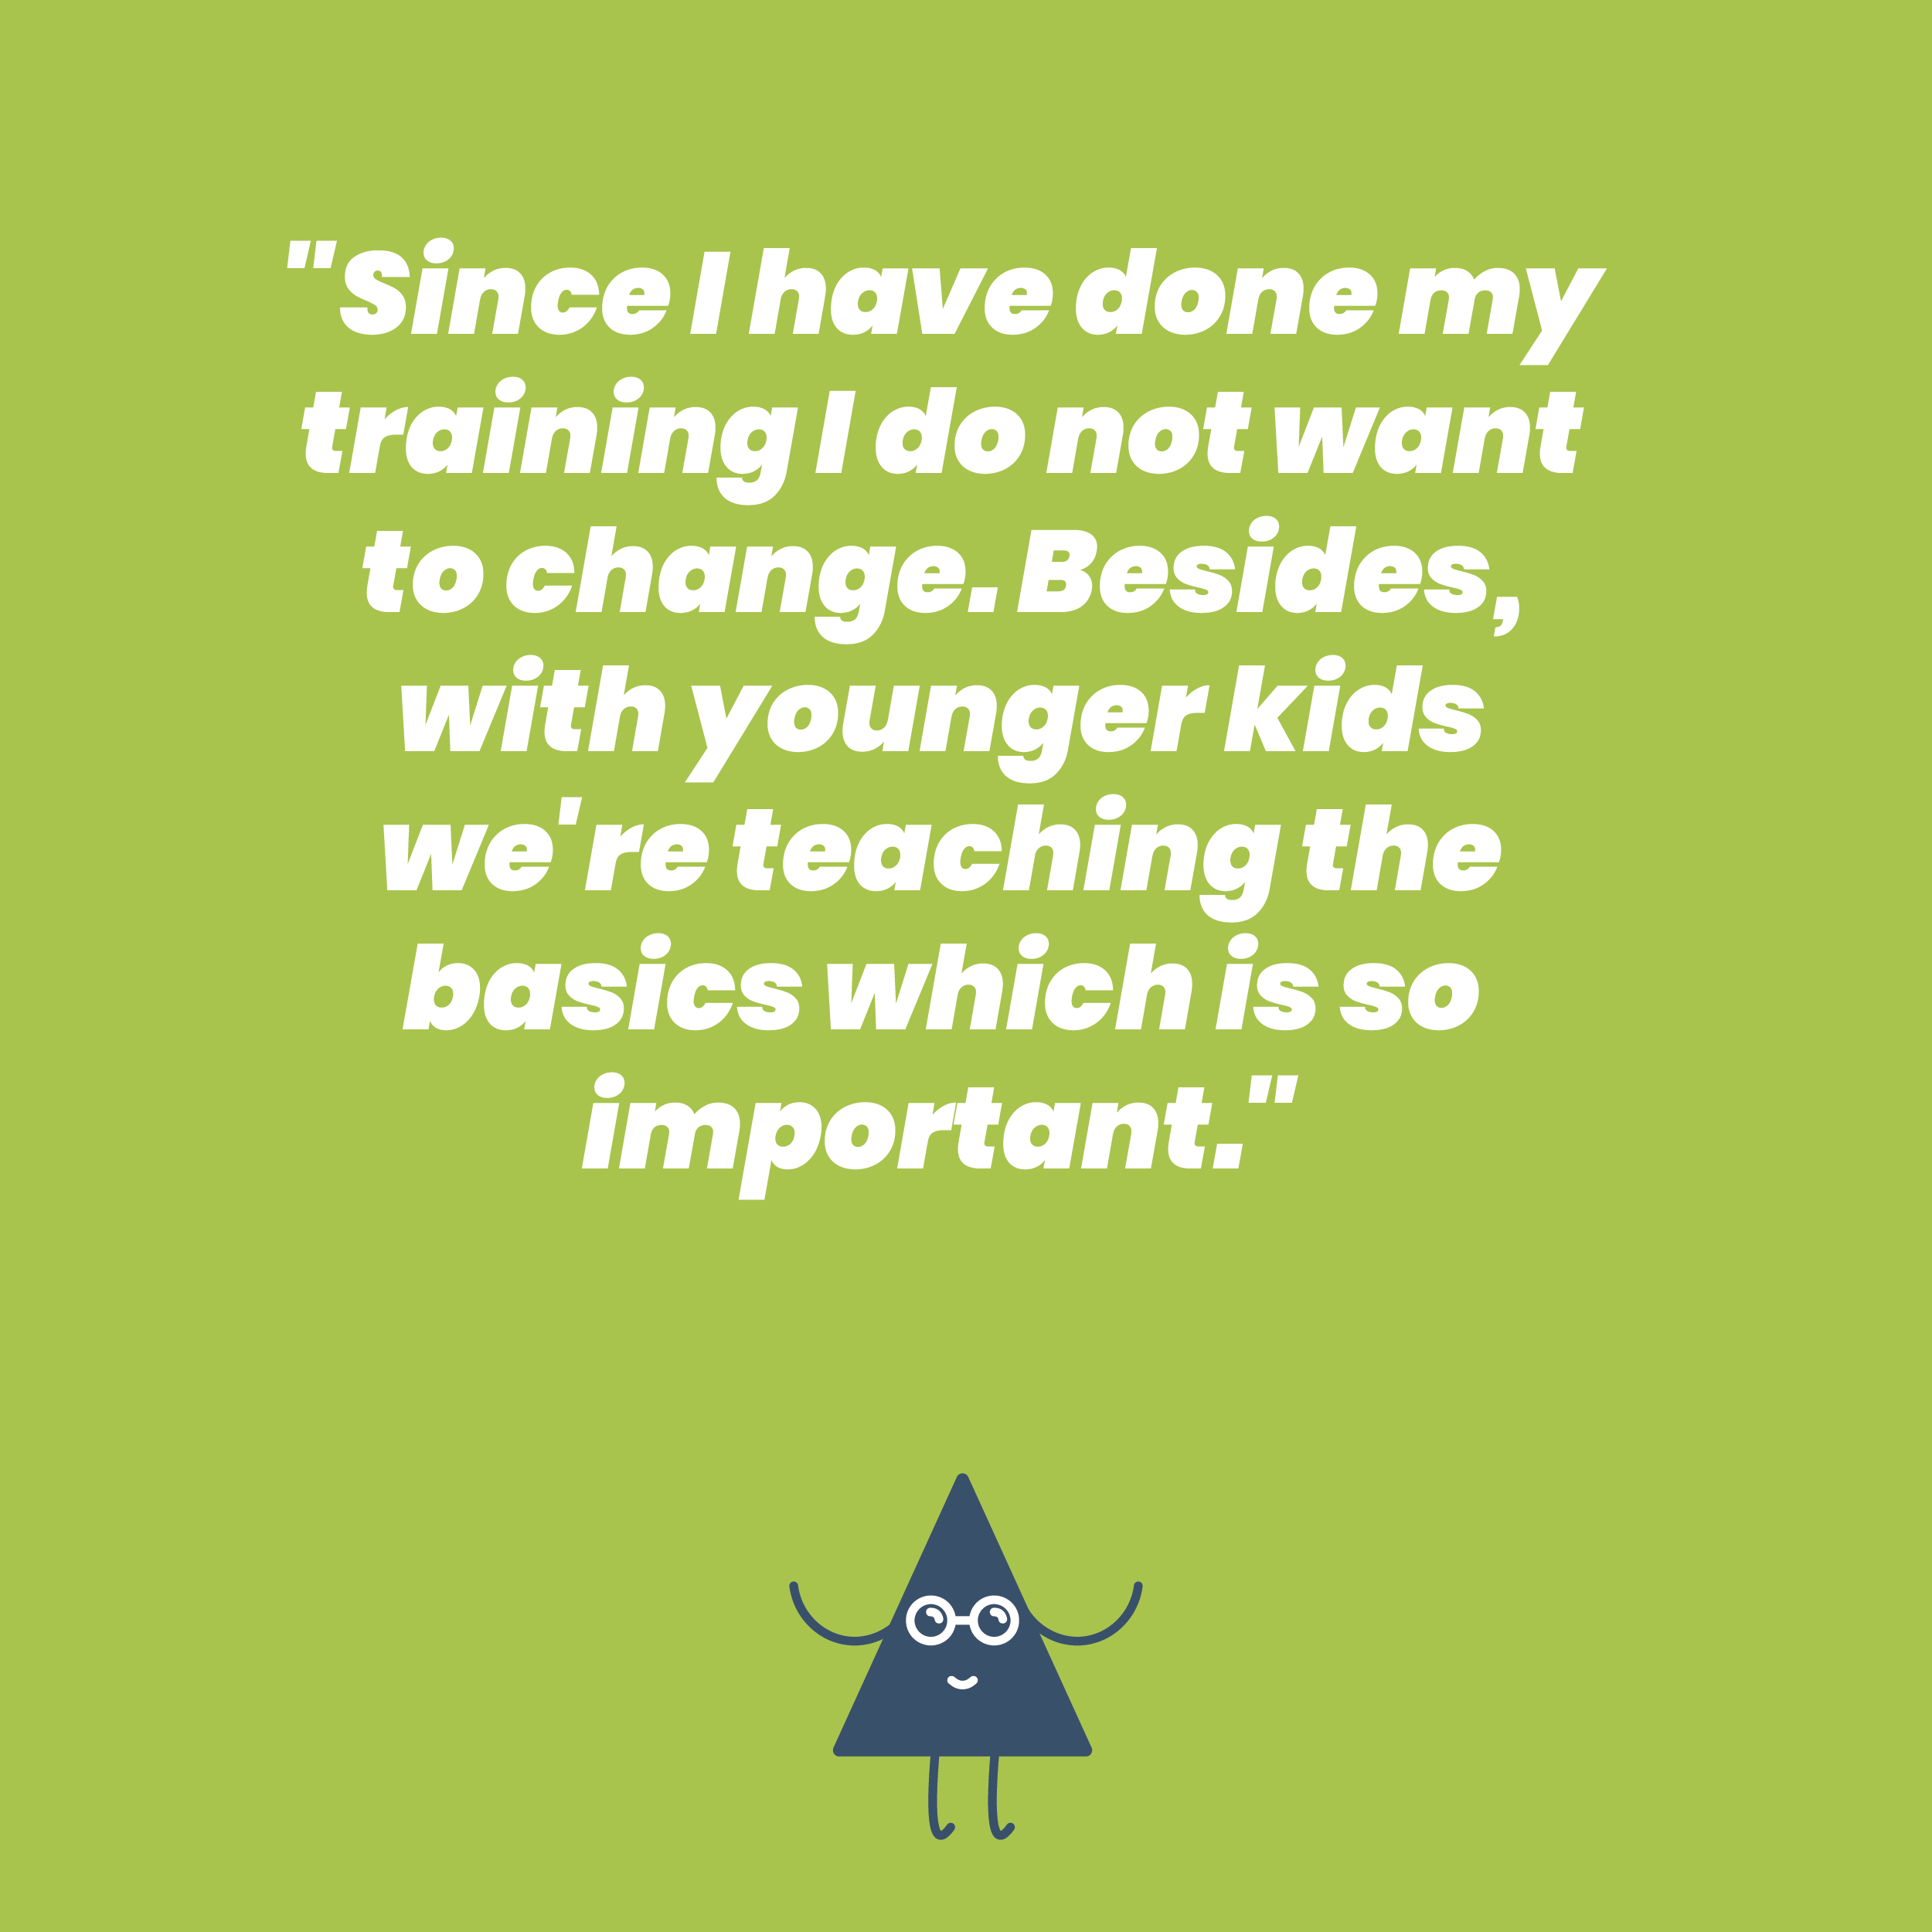 Since I have done my training I do not want to change. Besides, with younger kids we're teaching the basics which is so important